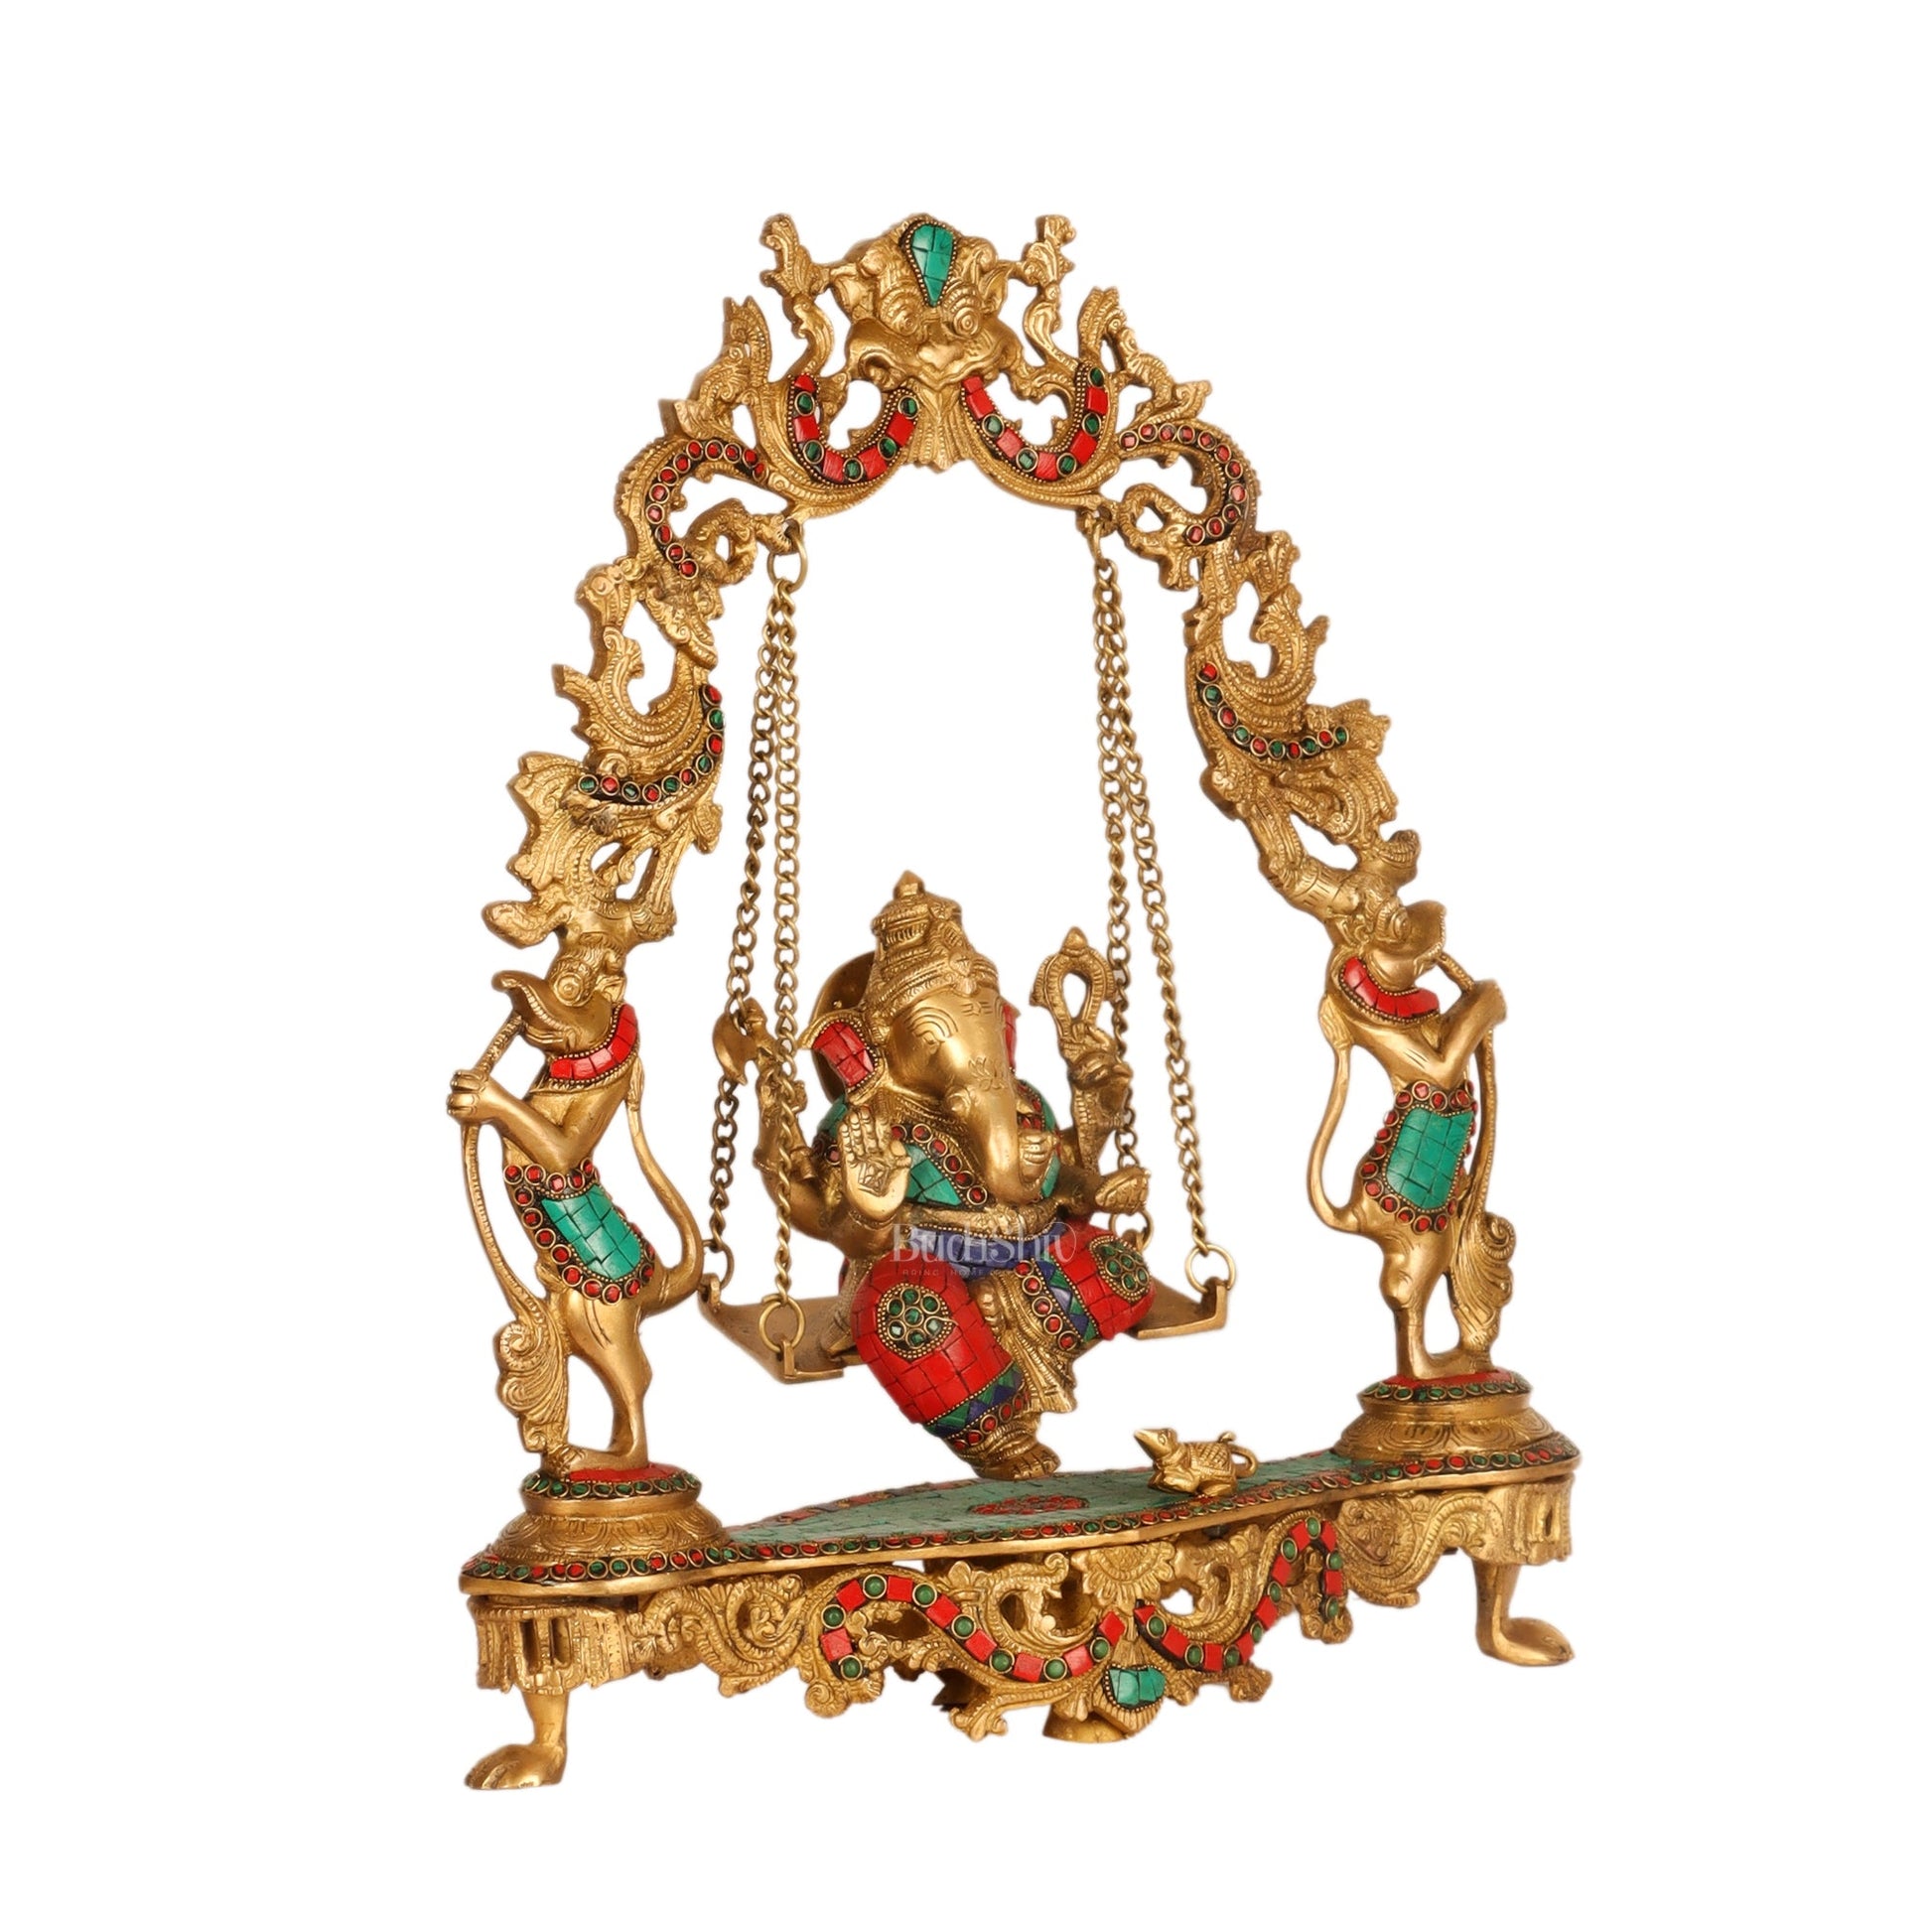 Brass Fine Quality Ganesha Swing with Brass Rings and Natural Stones, 18 inches - Budhshiv.com